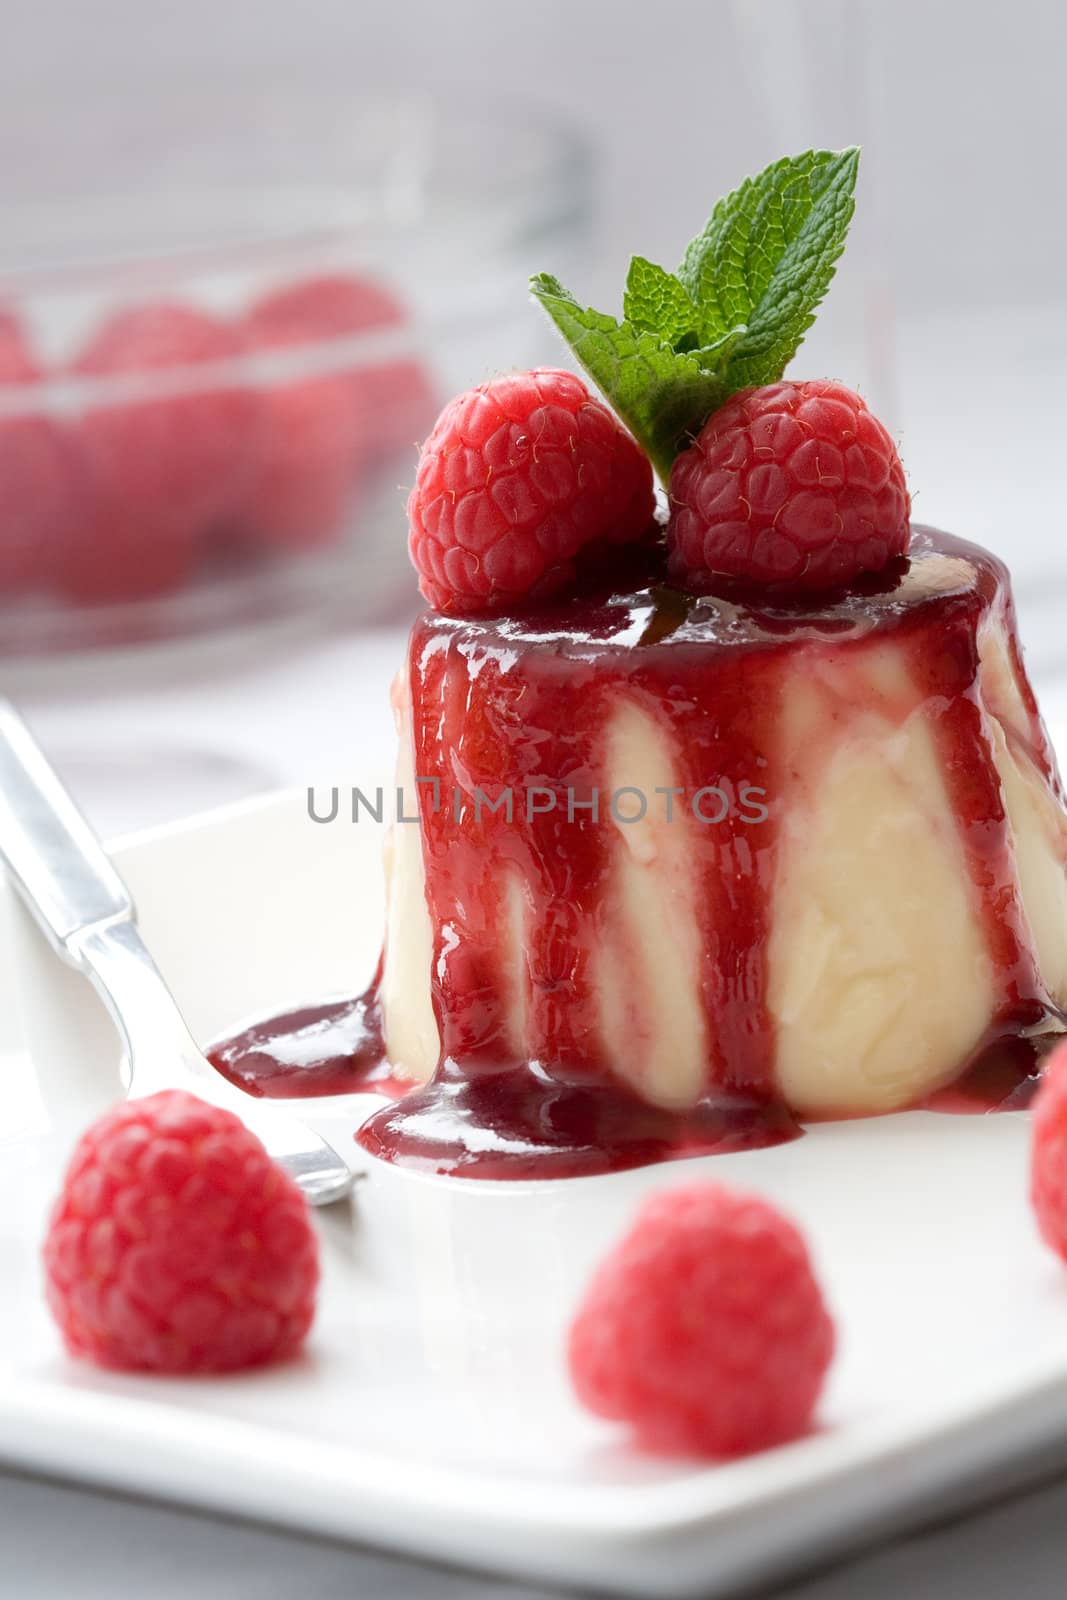 Delicious looking pannacotta dessert served with a spoon and raspberries